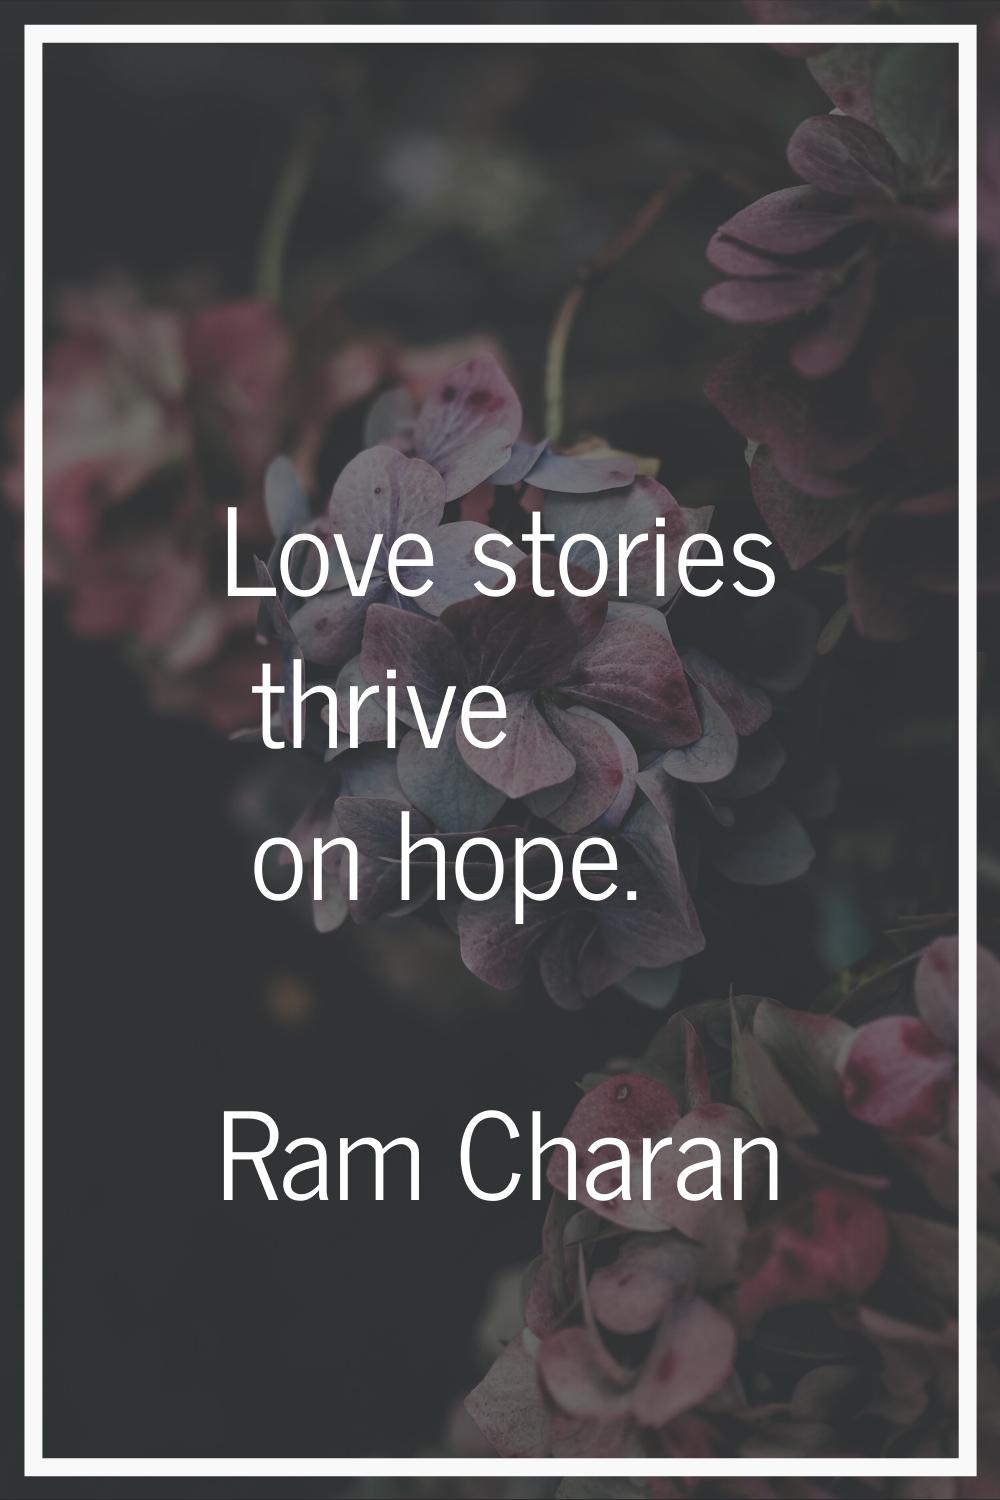 Love stories thrive on hope.